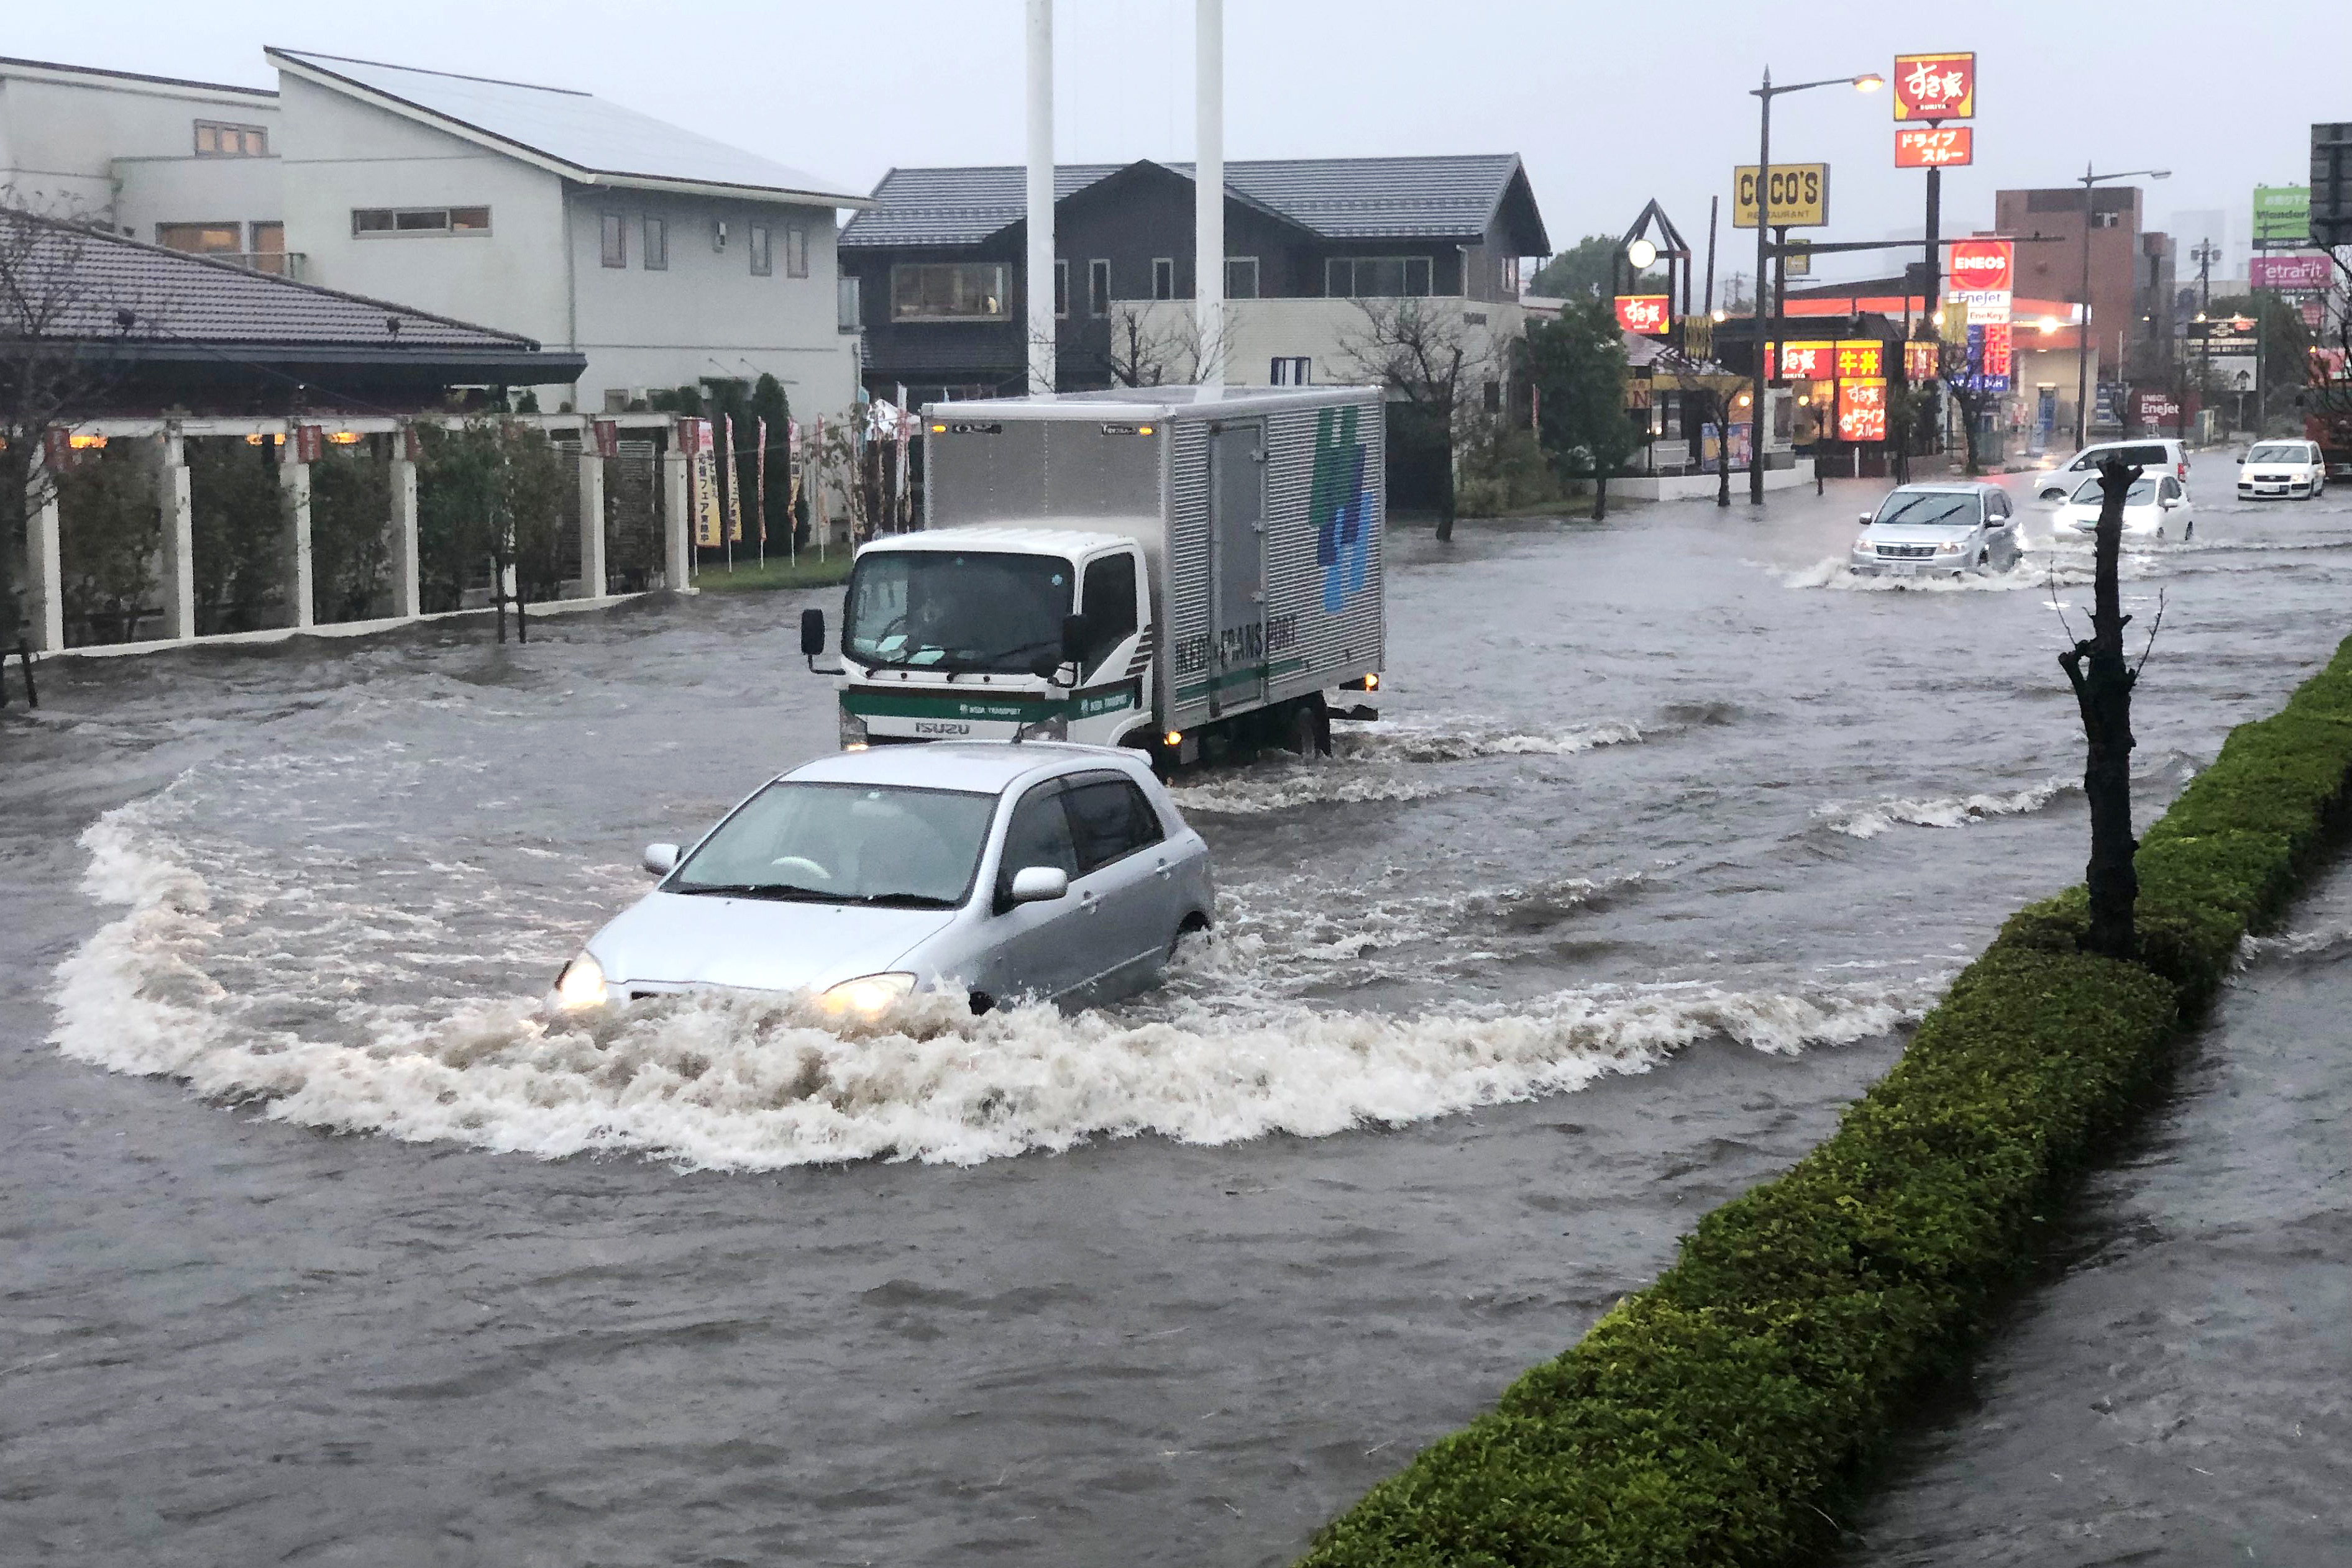 A street is flooded by heavy rain Friday, Oct. 25, 2019, in Narita, east of Tokyo. Torrential rain dumped from a low-pressure system hovering above Japan's main island has triggered flooding in towns east of Tokyo, prompting fears of more damage to areas already hit by typhoons earlier this month. (AP Photo/Lee Jin-man)